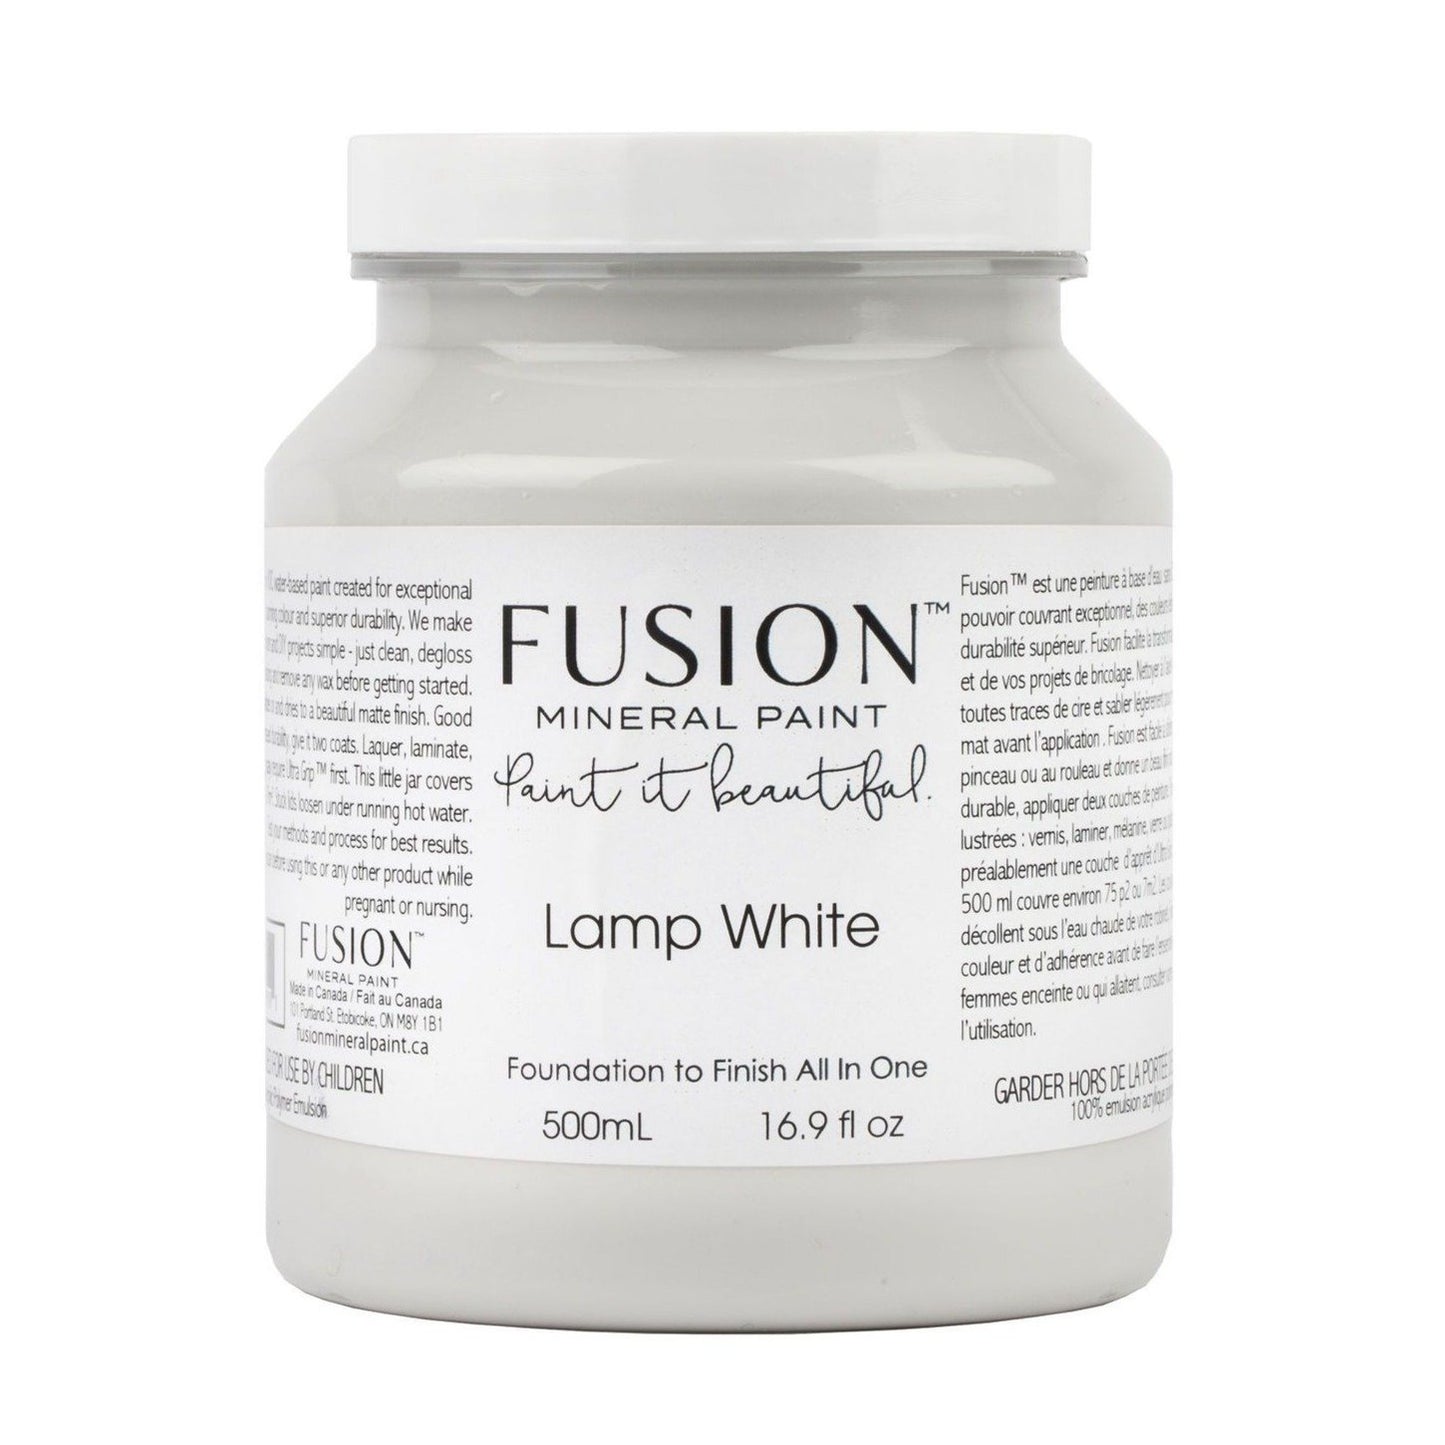 LAMP WHITE - Fusion Mineral Paint - 37ml, 500ml